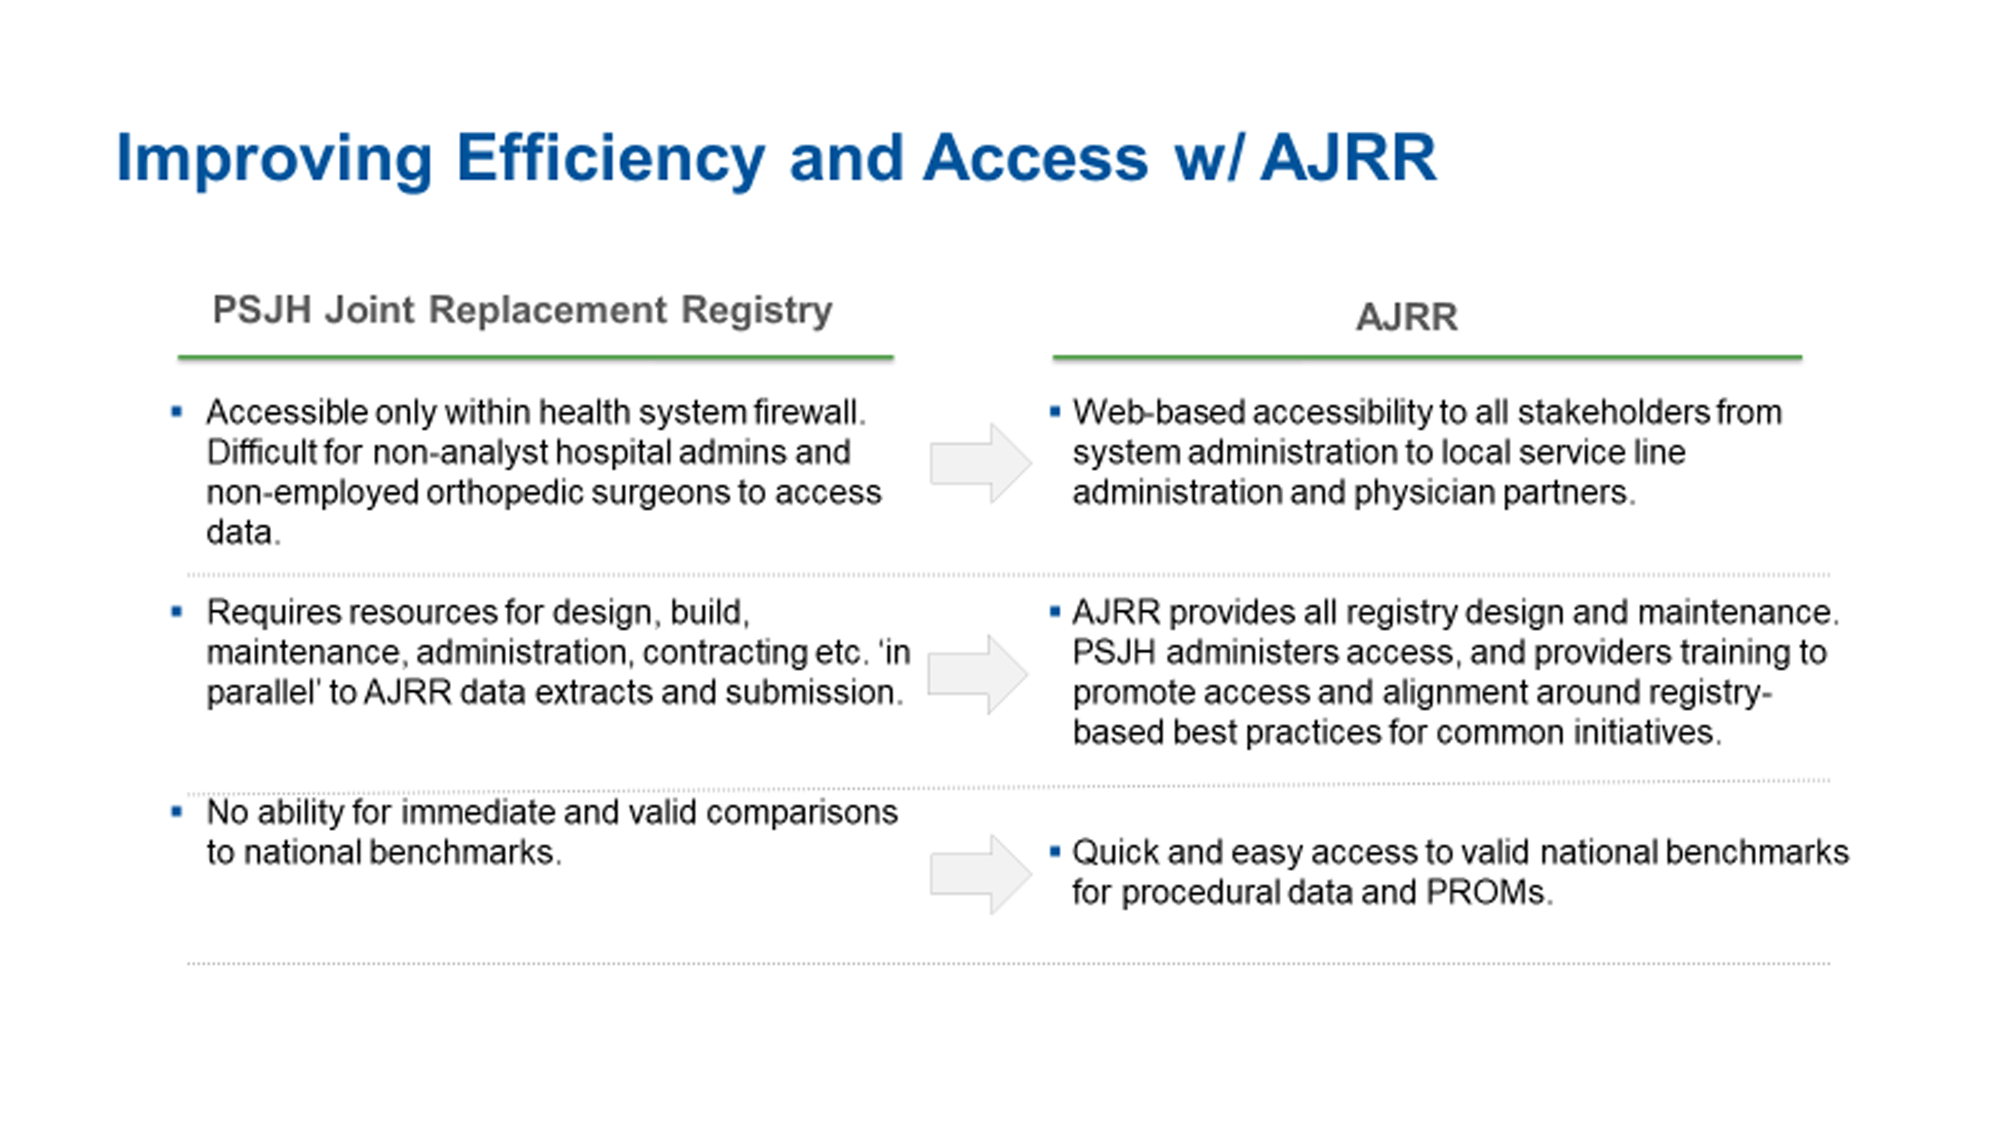 Improving Efficiency and Access with AJRR